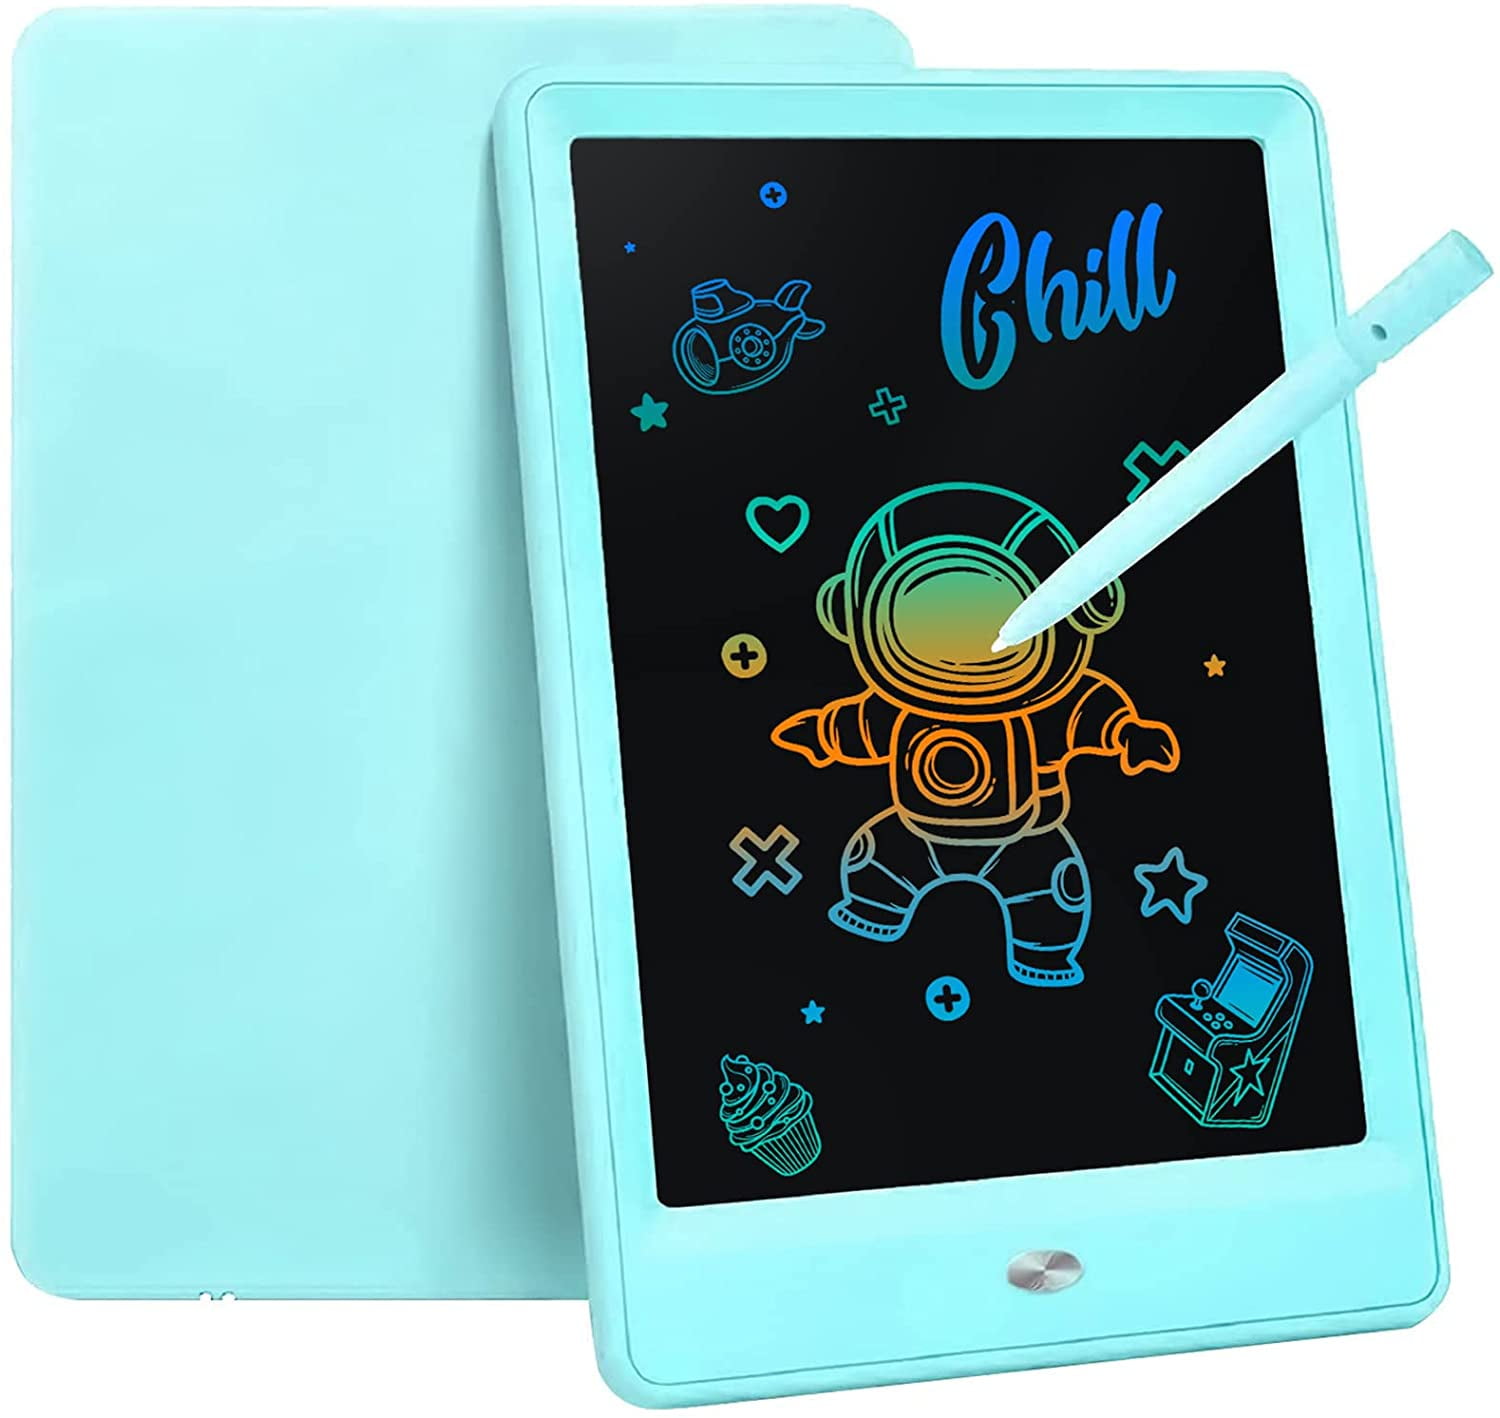 Electronic LCD Writing Digital Colorful Pad Tablet Drawing Graphic Board Notepad 